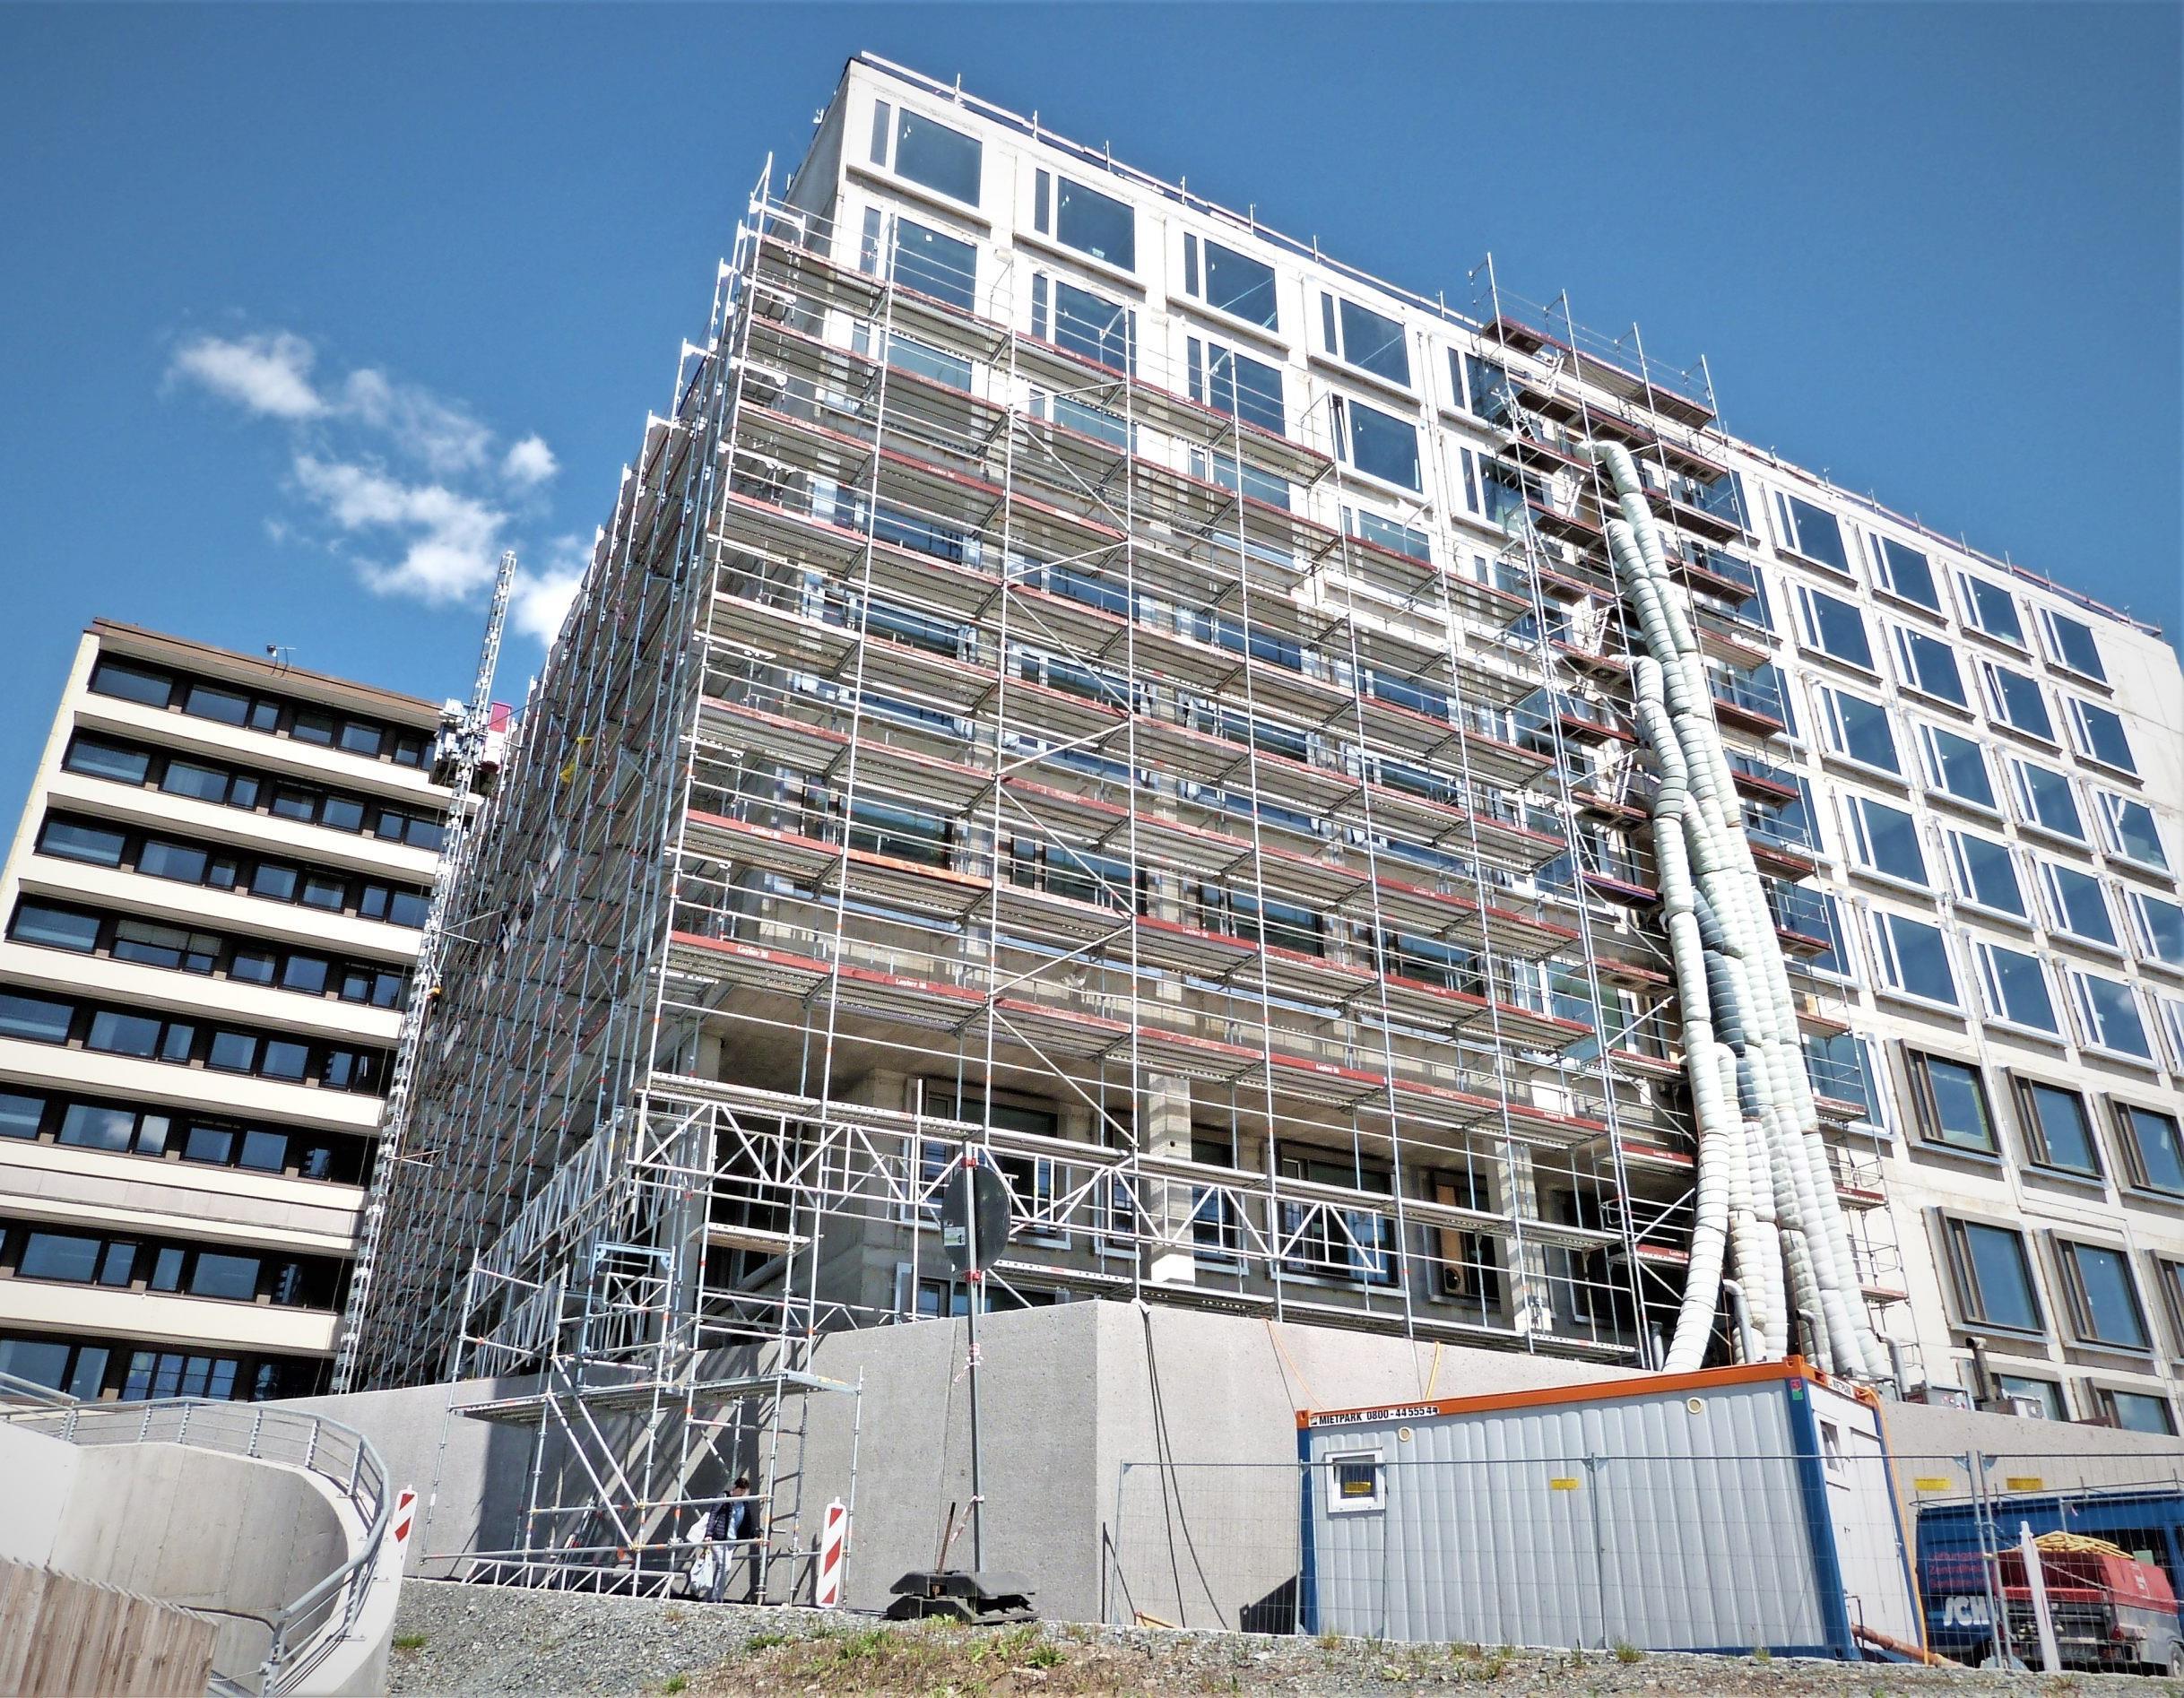 Construction phase 9 improves conditions for patients and staff at the hospital